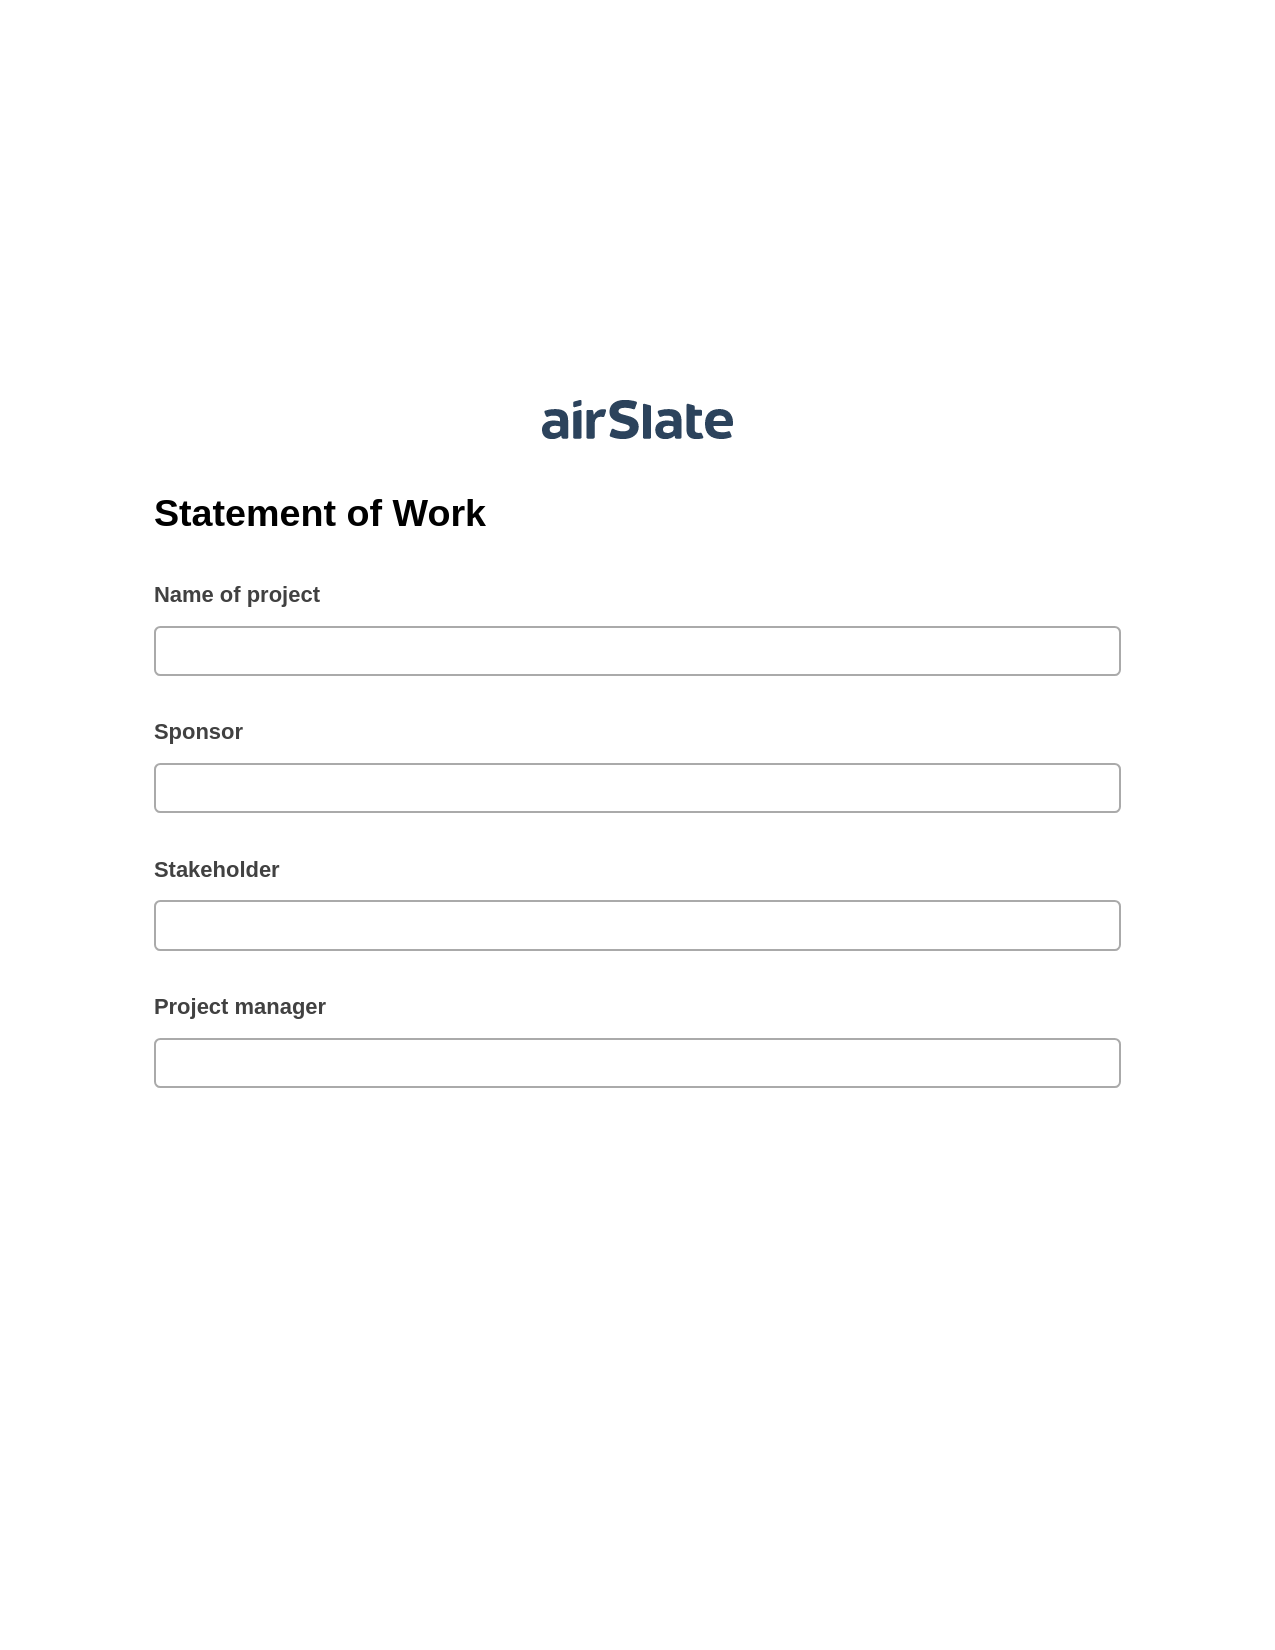 Statement of Work Pre-fill from Excel Spreadsheet Bot, Google Cloud Print Bot, Export to Formstack Documents Bot